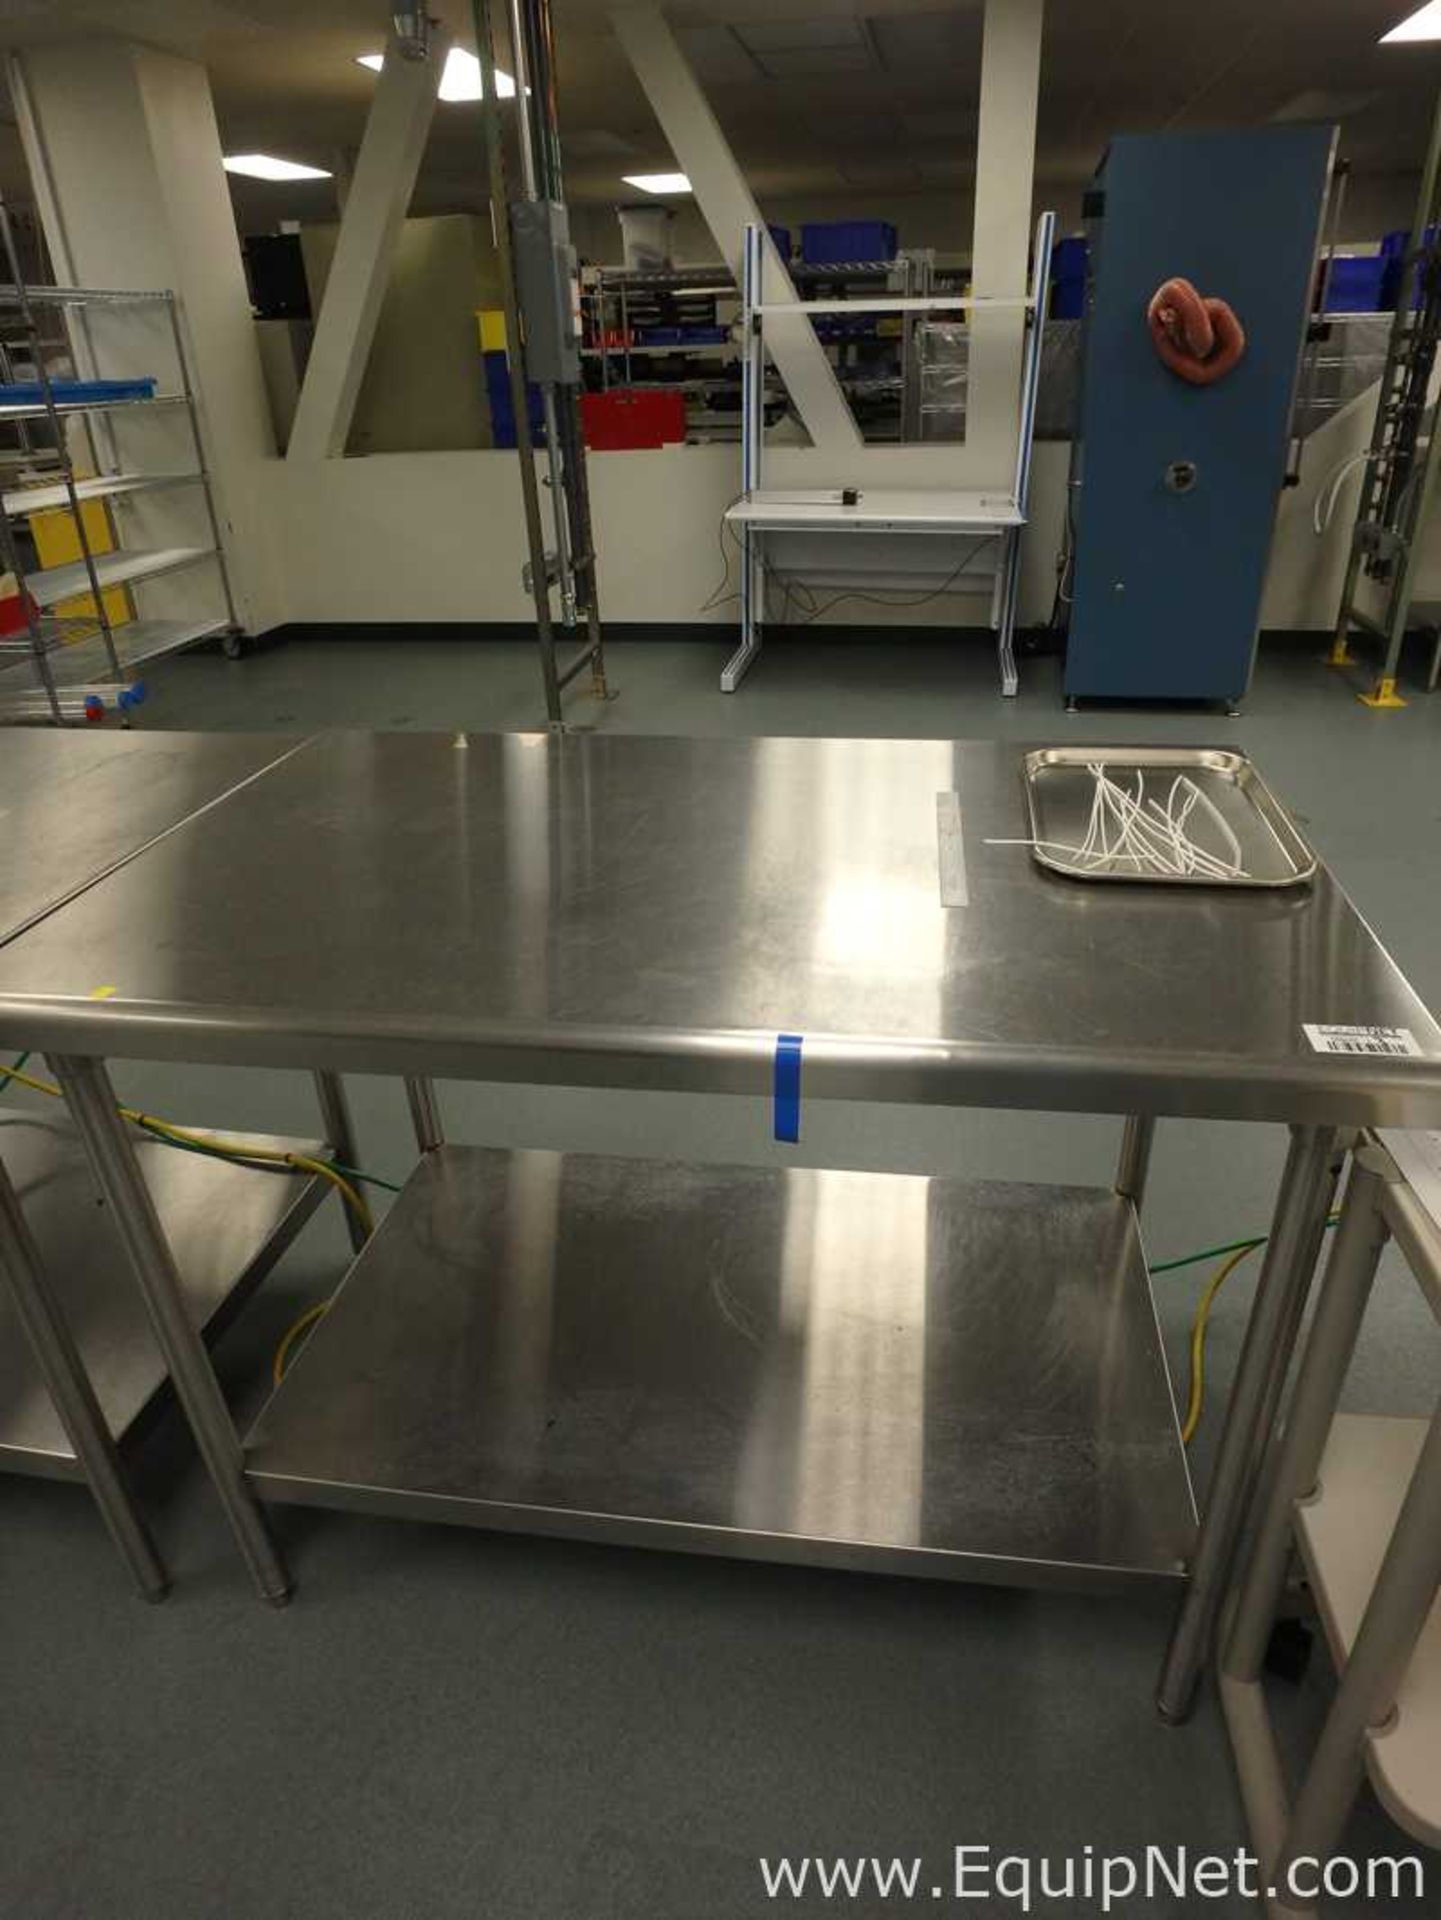 Lot of 4 Stainless Steel Tables - Image 6 of 6